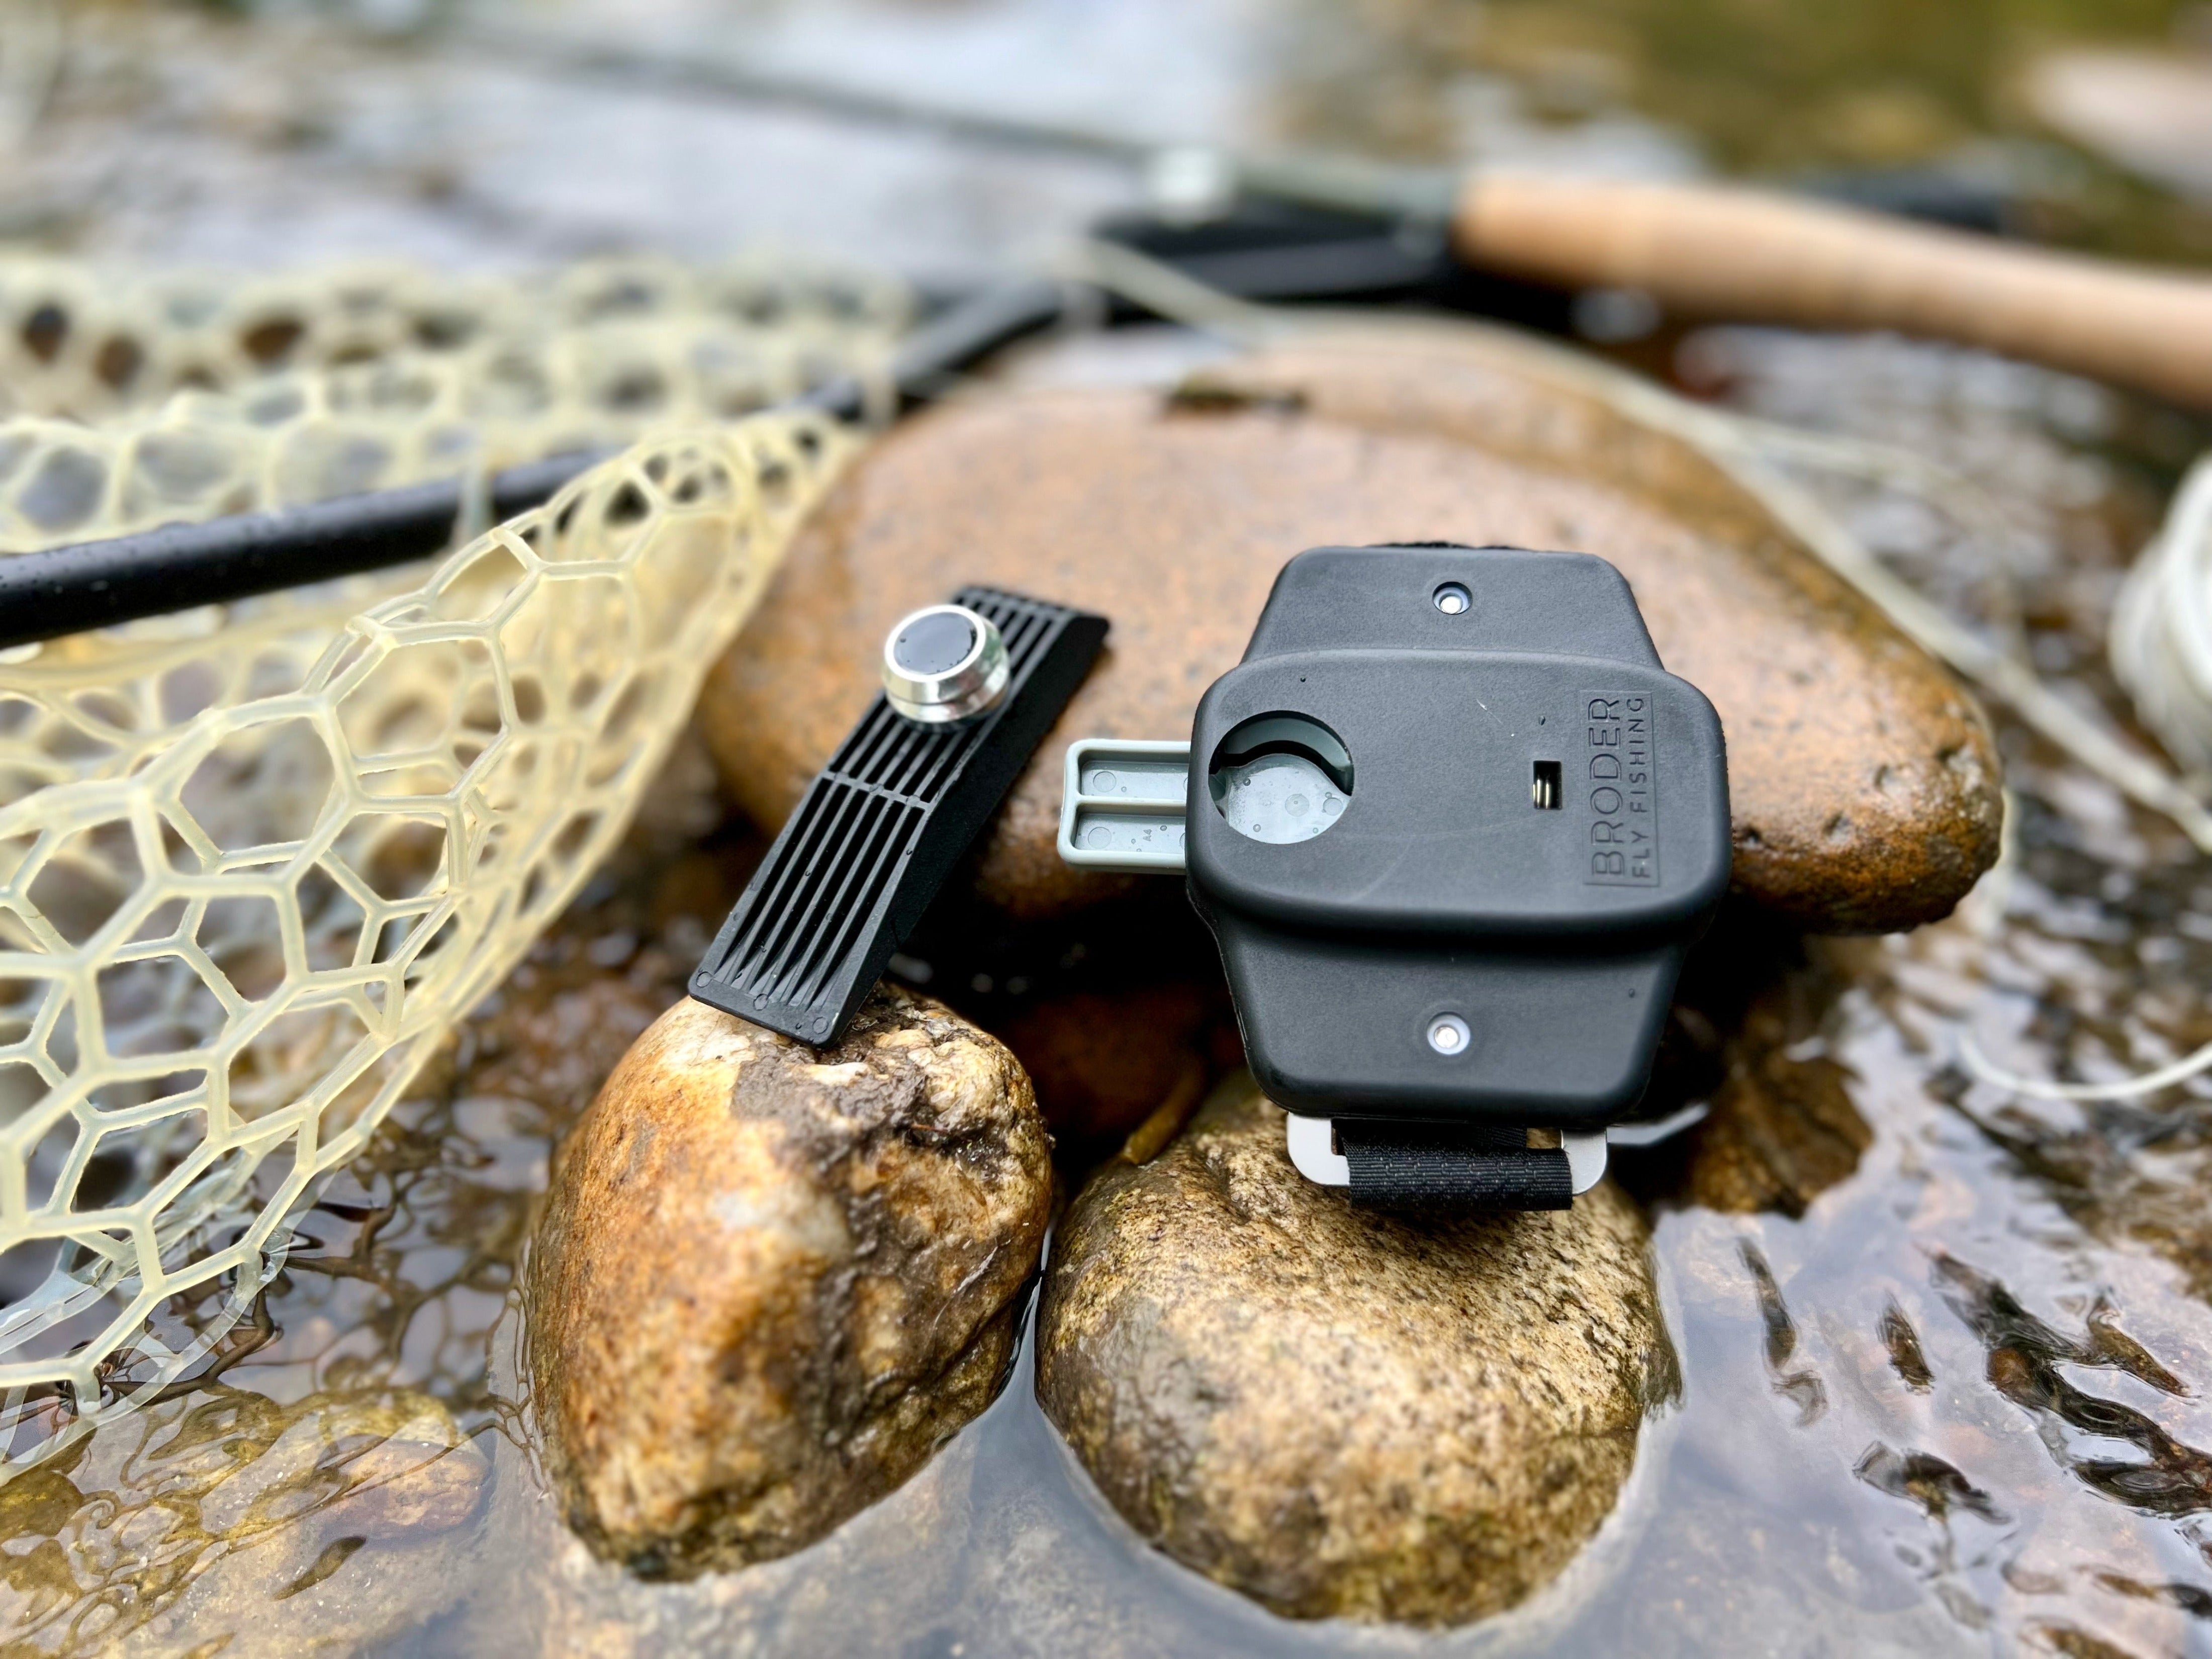 Broder Fly Fishing on Instagram: The Broder Net Clip maintains its  connection while allowing for 360 degree rotation. This means it can find a  natural position in heavy current or deeper water